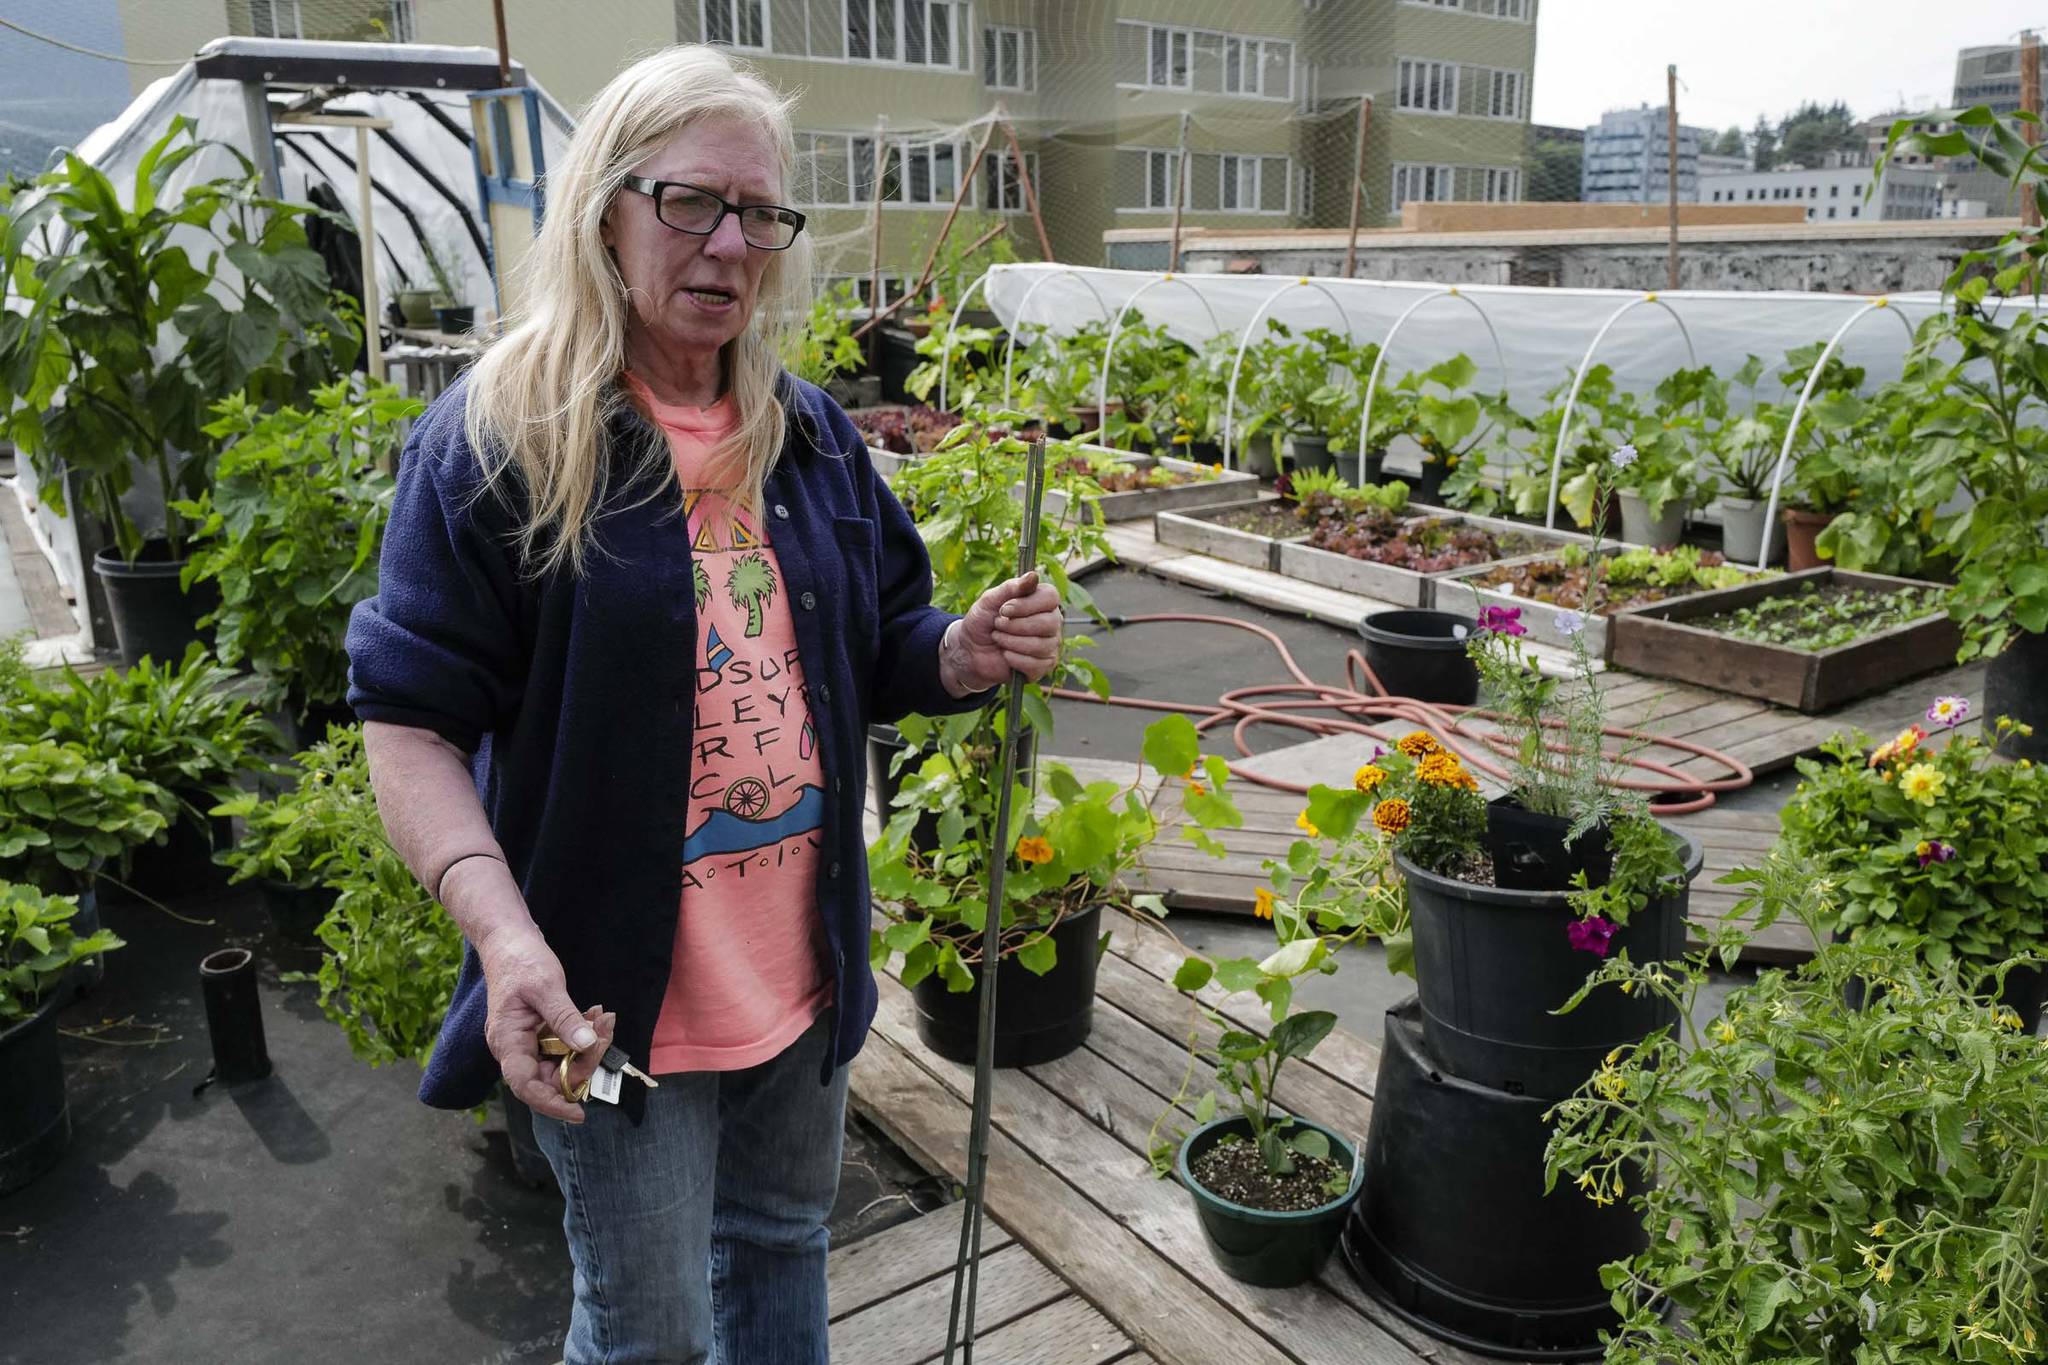 Judy Mauermann, a resident of the Glory Hall, gives a tour of the roof top garden she tends at the downtown soup kitchen and emergency shelter on Friday, Aug. 2, 2019. The produce is used daily in meals to feed patrons. (Michael Penn | Juneau Empire)